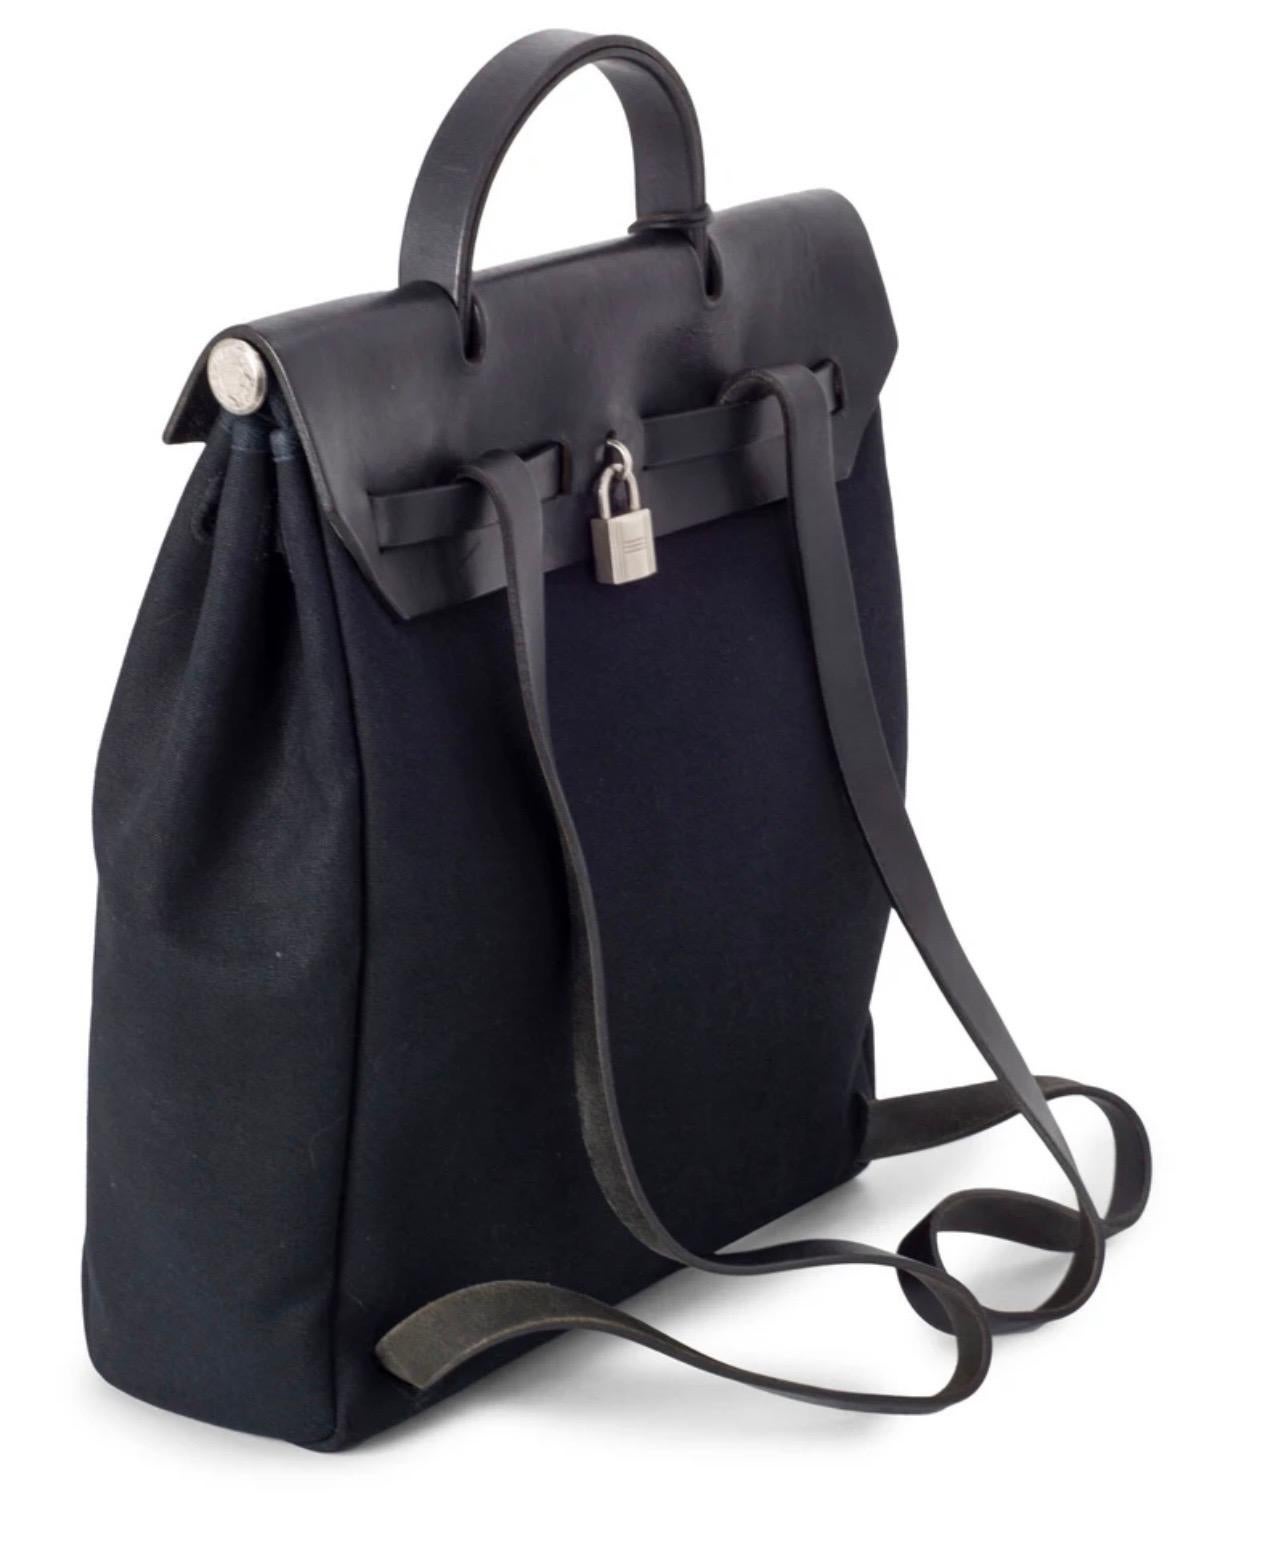 Guaranteed Authentic Hermes Her Bag Backpack or 100% of your money back. This Hermes backpack is in black canvas leather. It features a lock closure and key. 

Measurements: 
Width 15.7 inch
Height 13.3 inch
Depth 4 inch
handle 8 inch
Shoulder 24.5